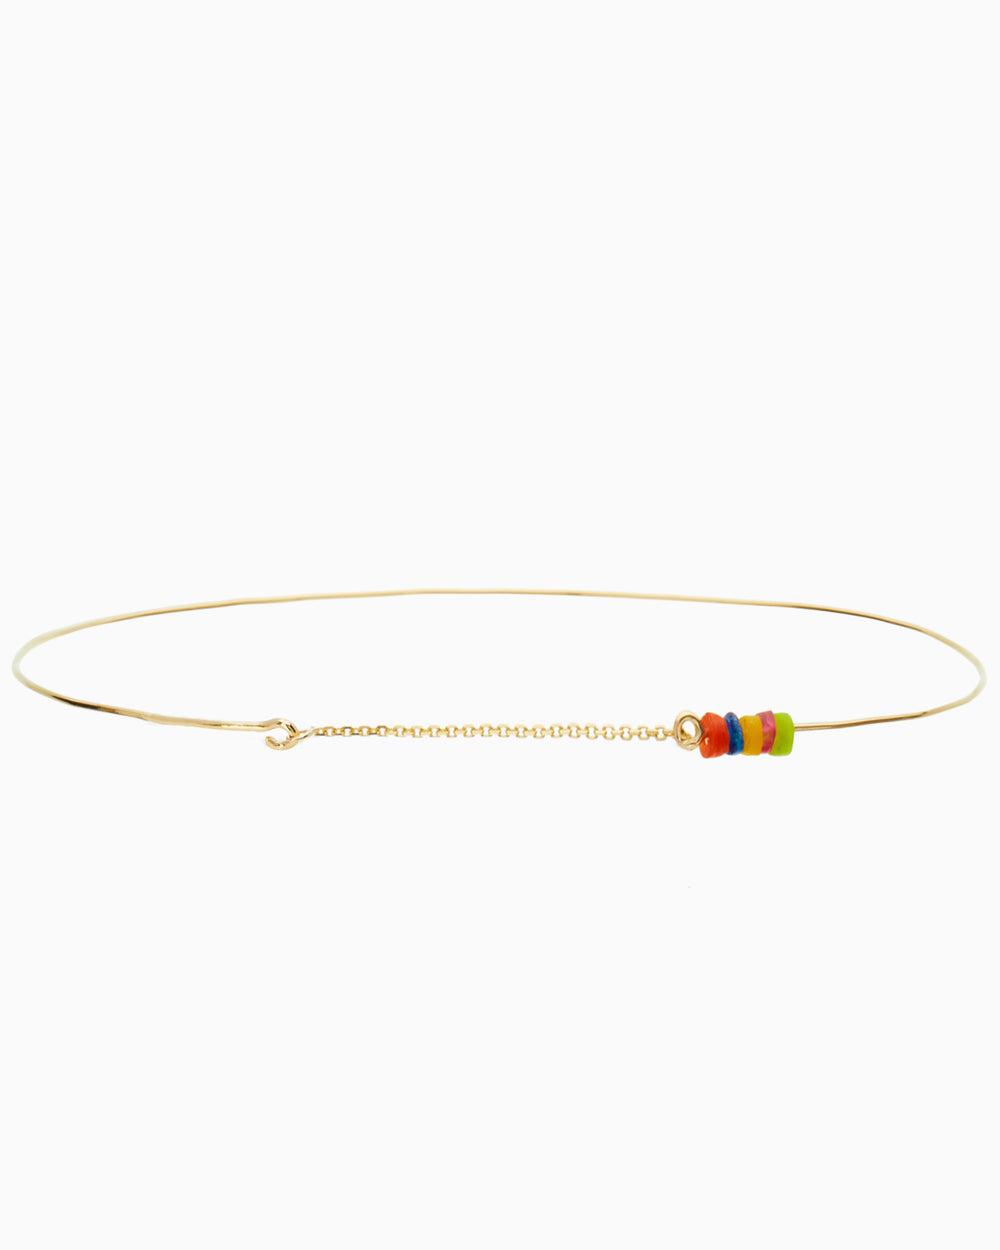 Resin Weave Choker | Solid Gold